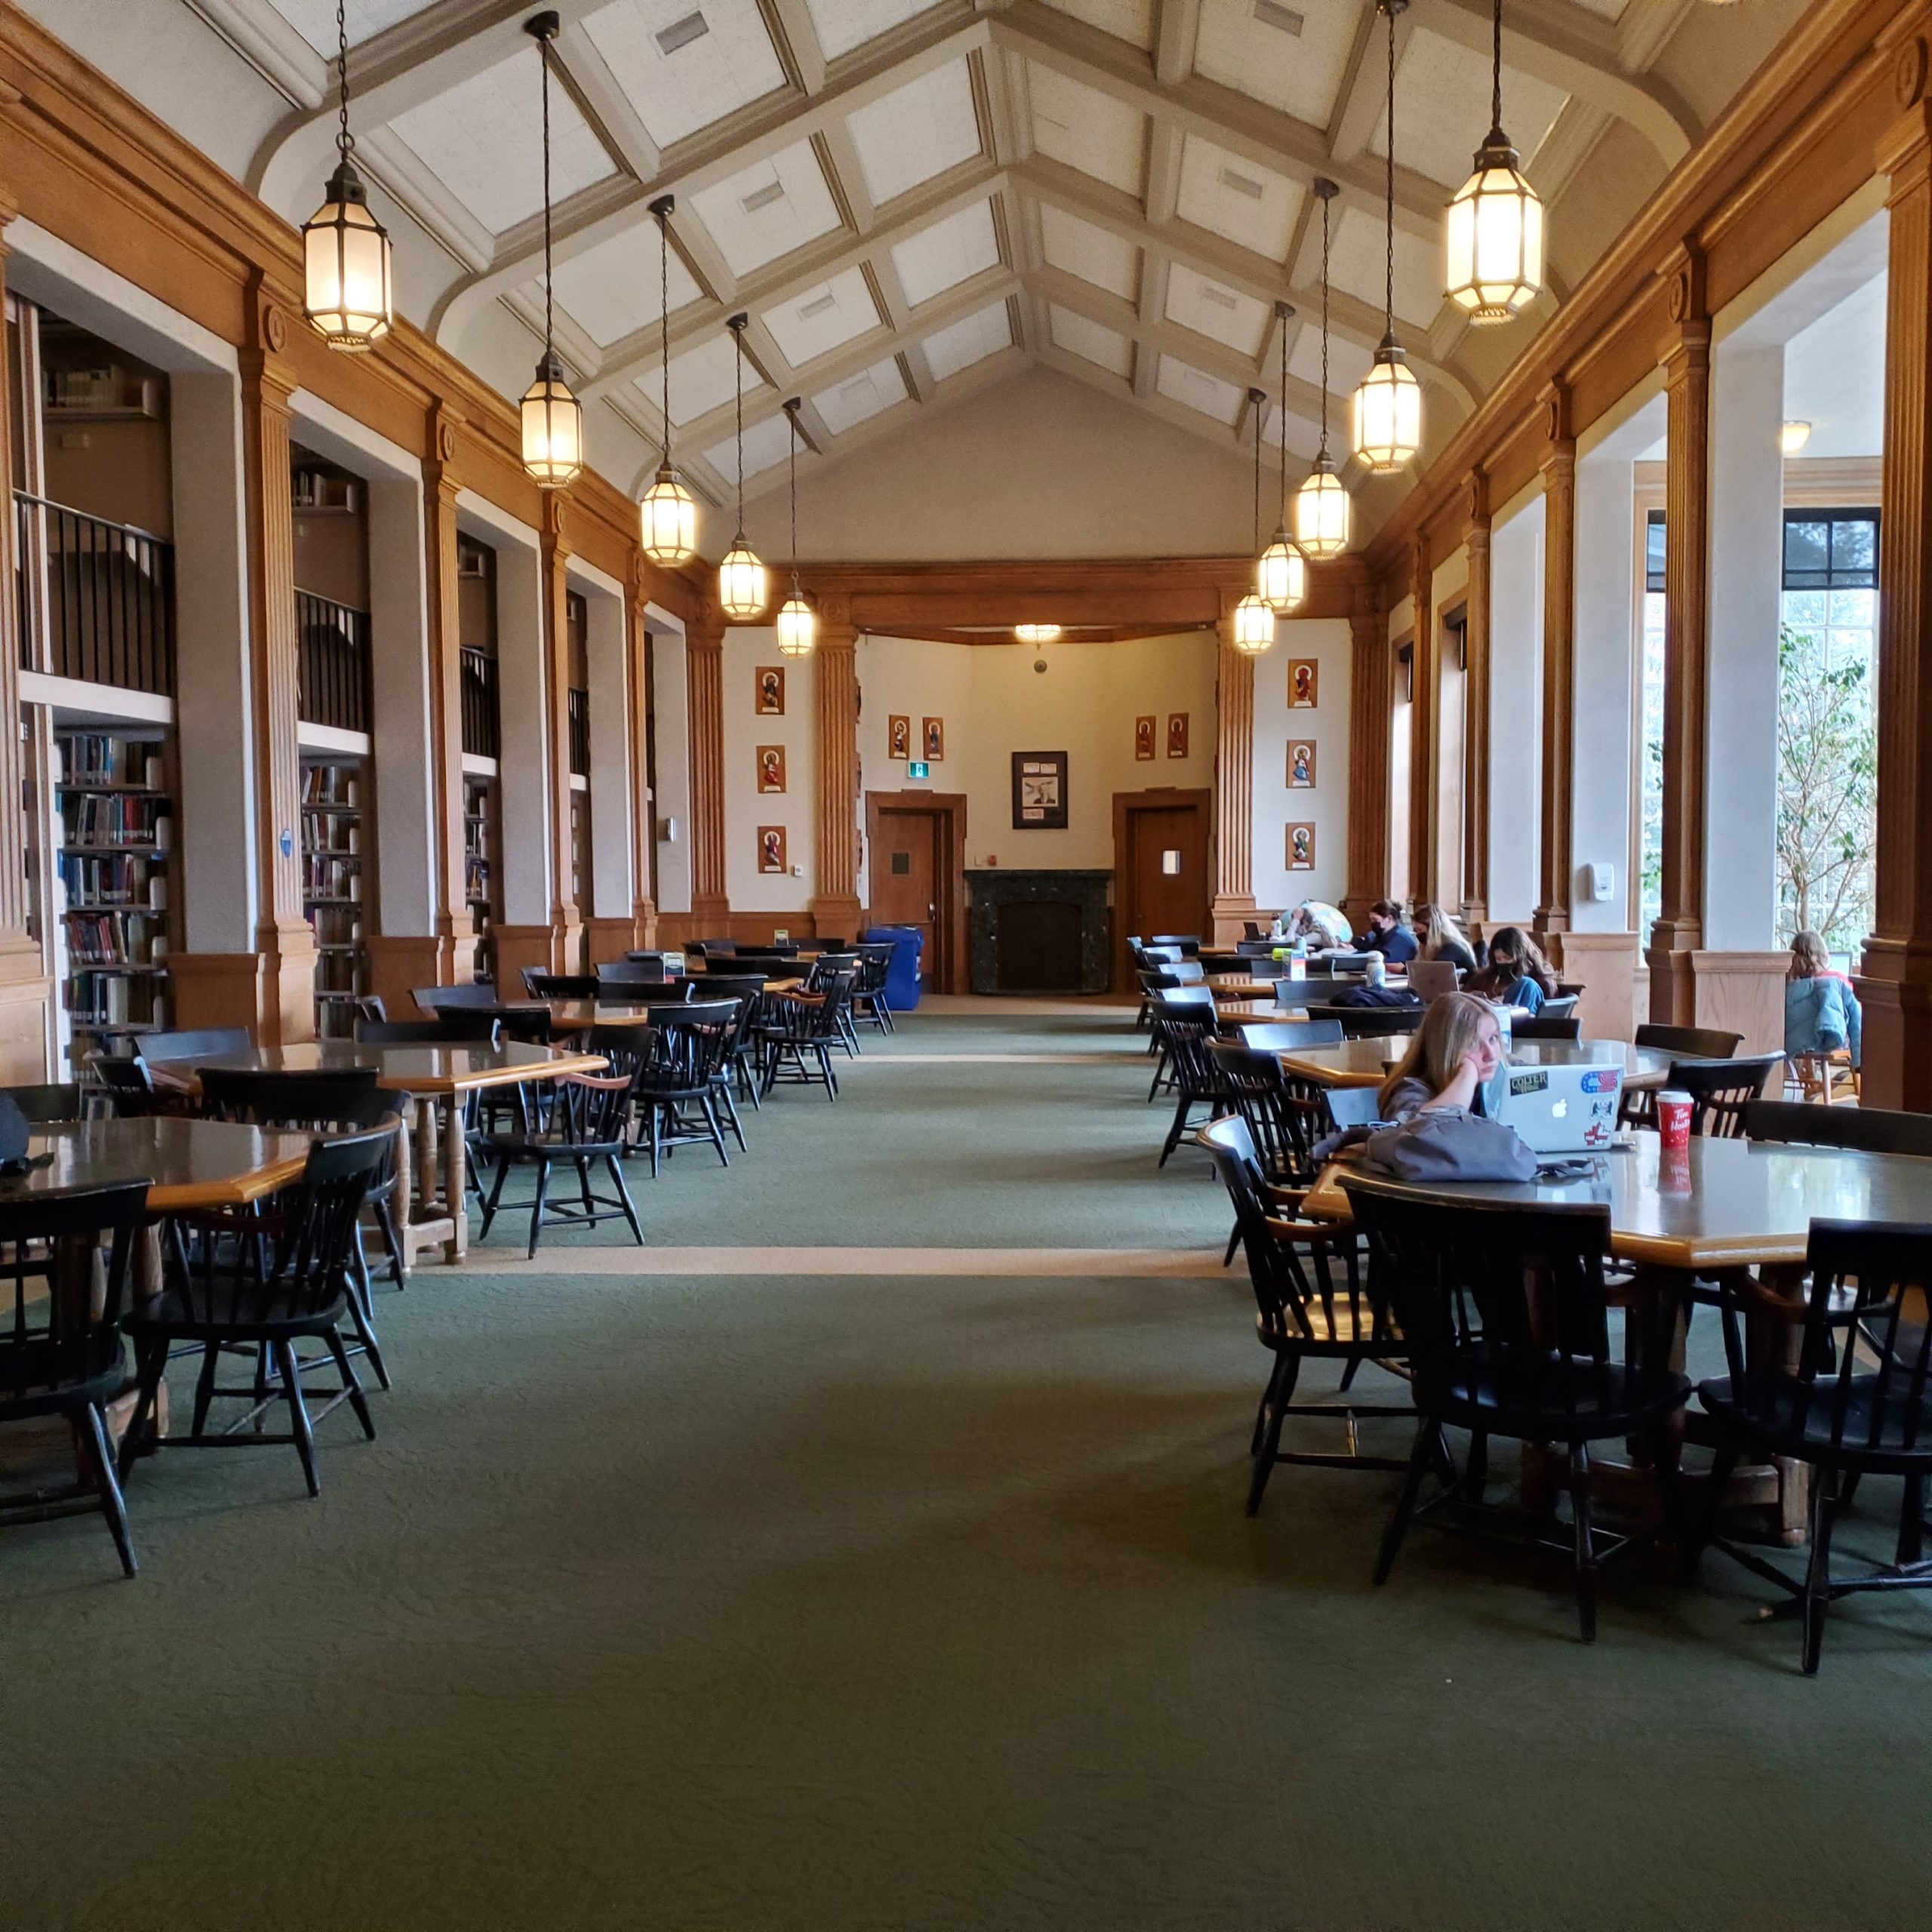 Photograph of the Hall of the Clans in the Angus L. Macdonald Library